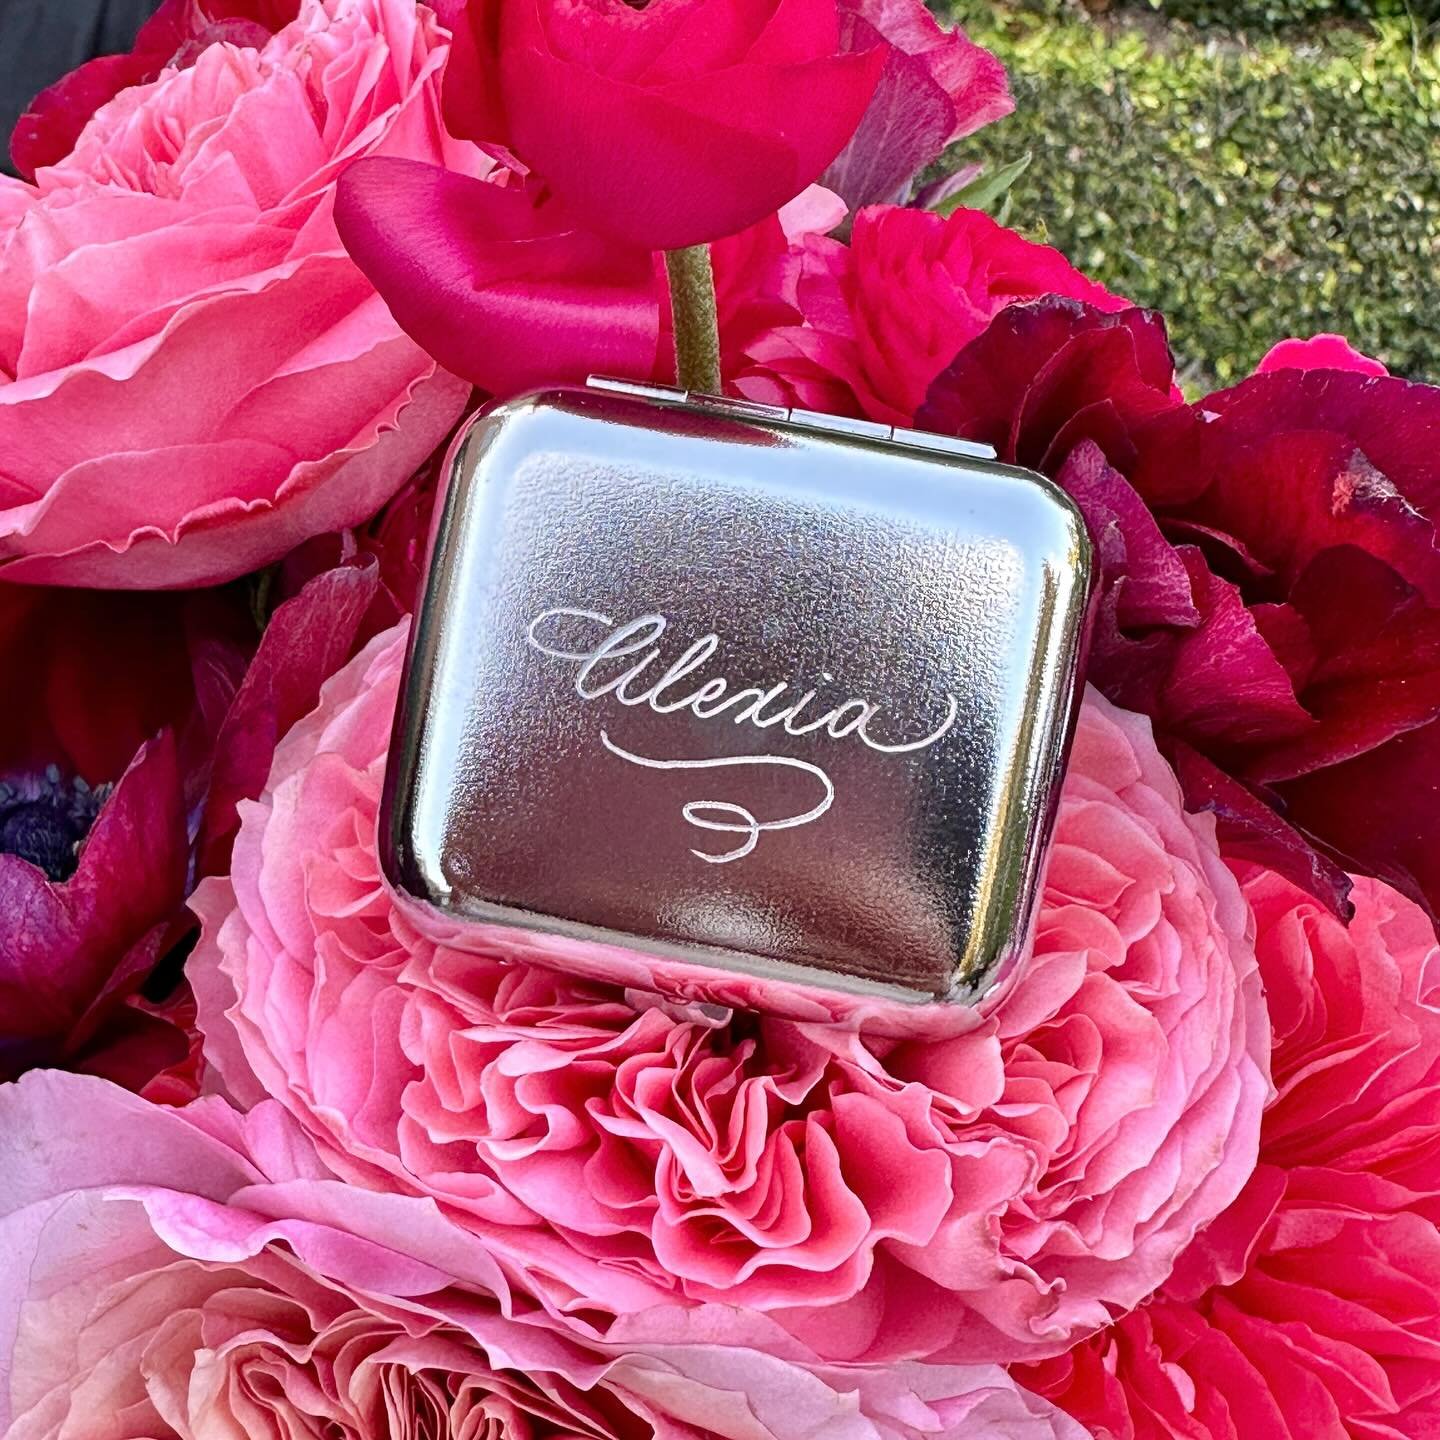 Instead of traditional party favors, elevate your party gifting experience with a live event artist who can personalize items and make the gifting experience more meaningful to the guests. 🎁

I personalized these stainless steel ash tray containers 